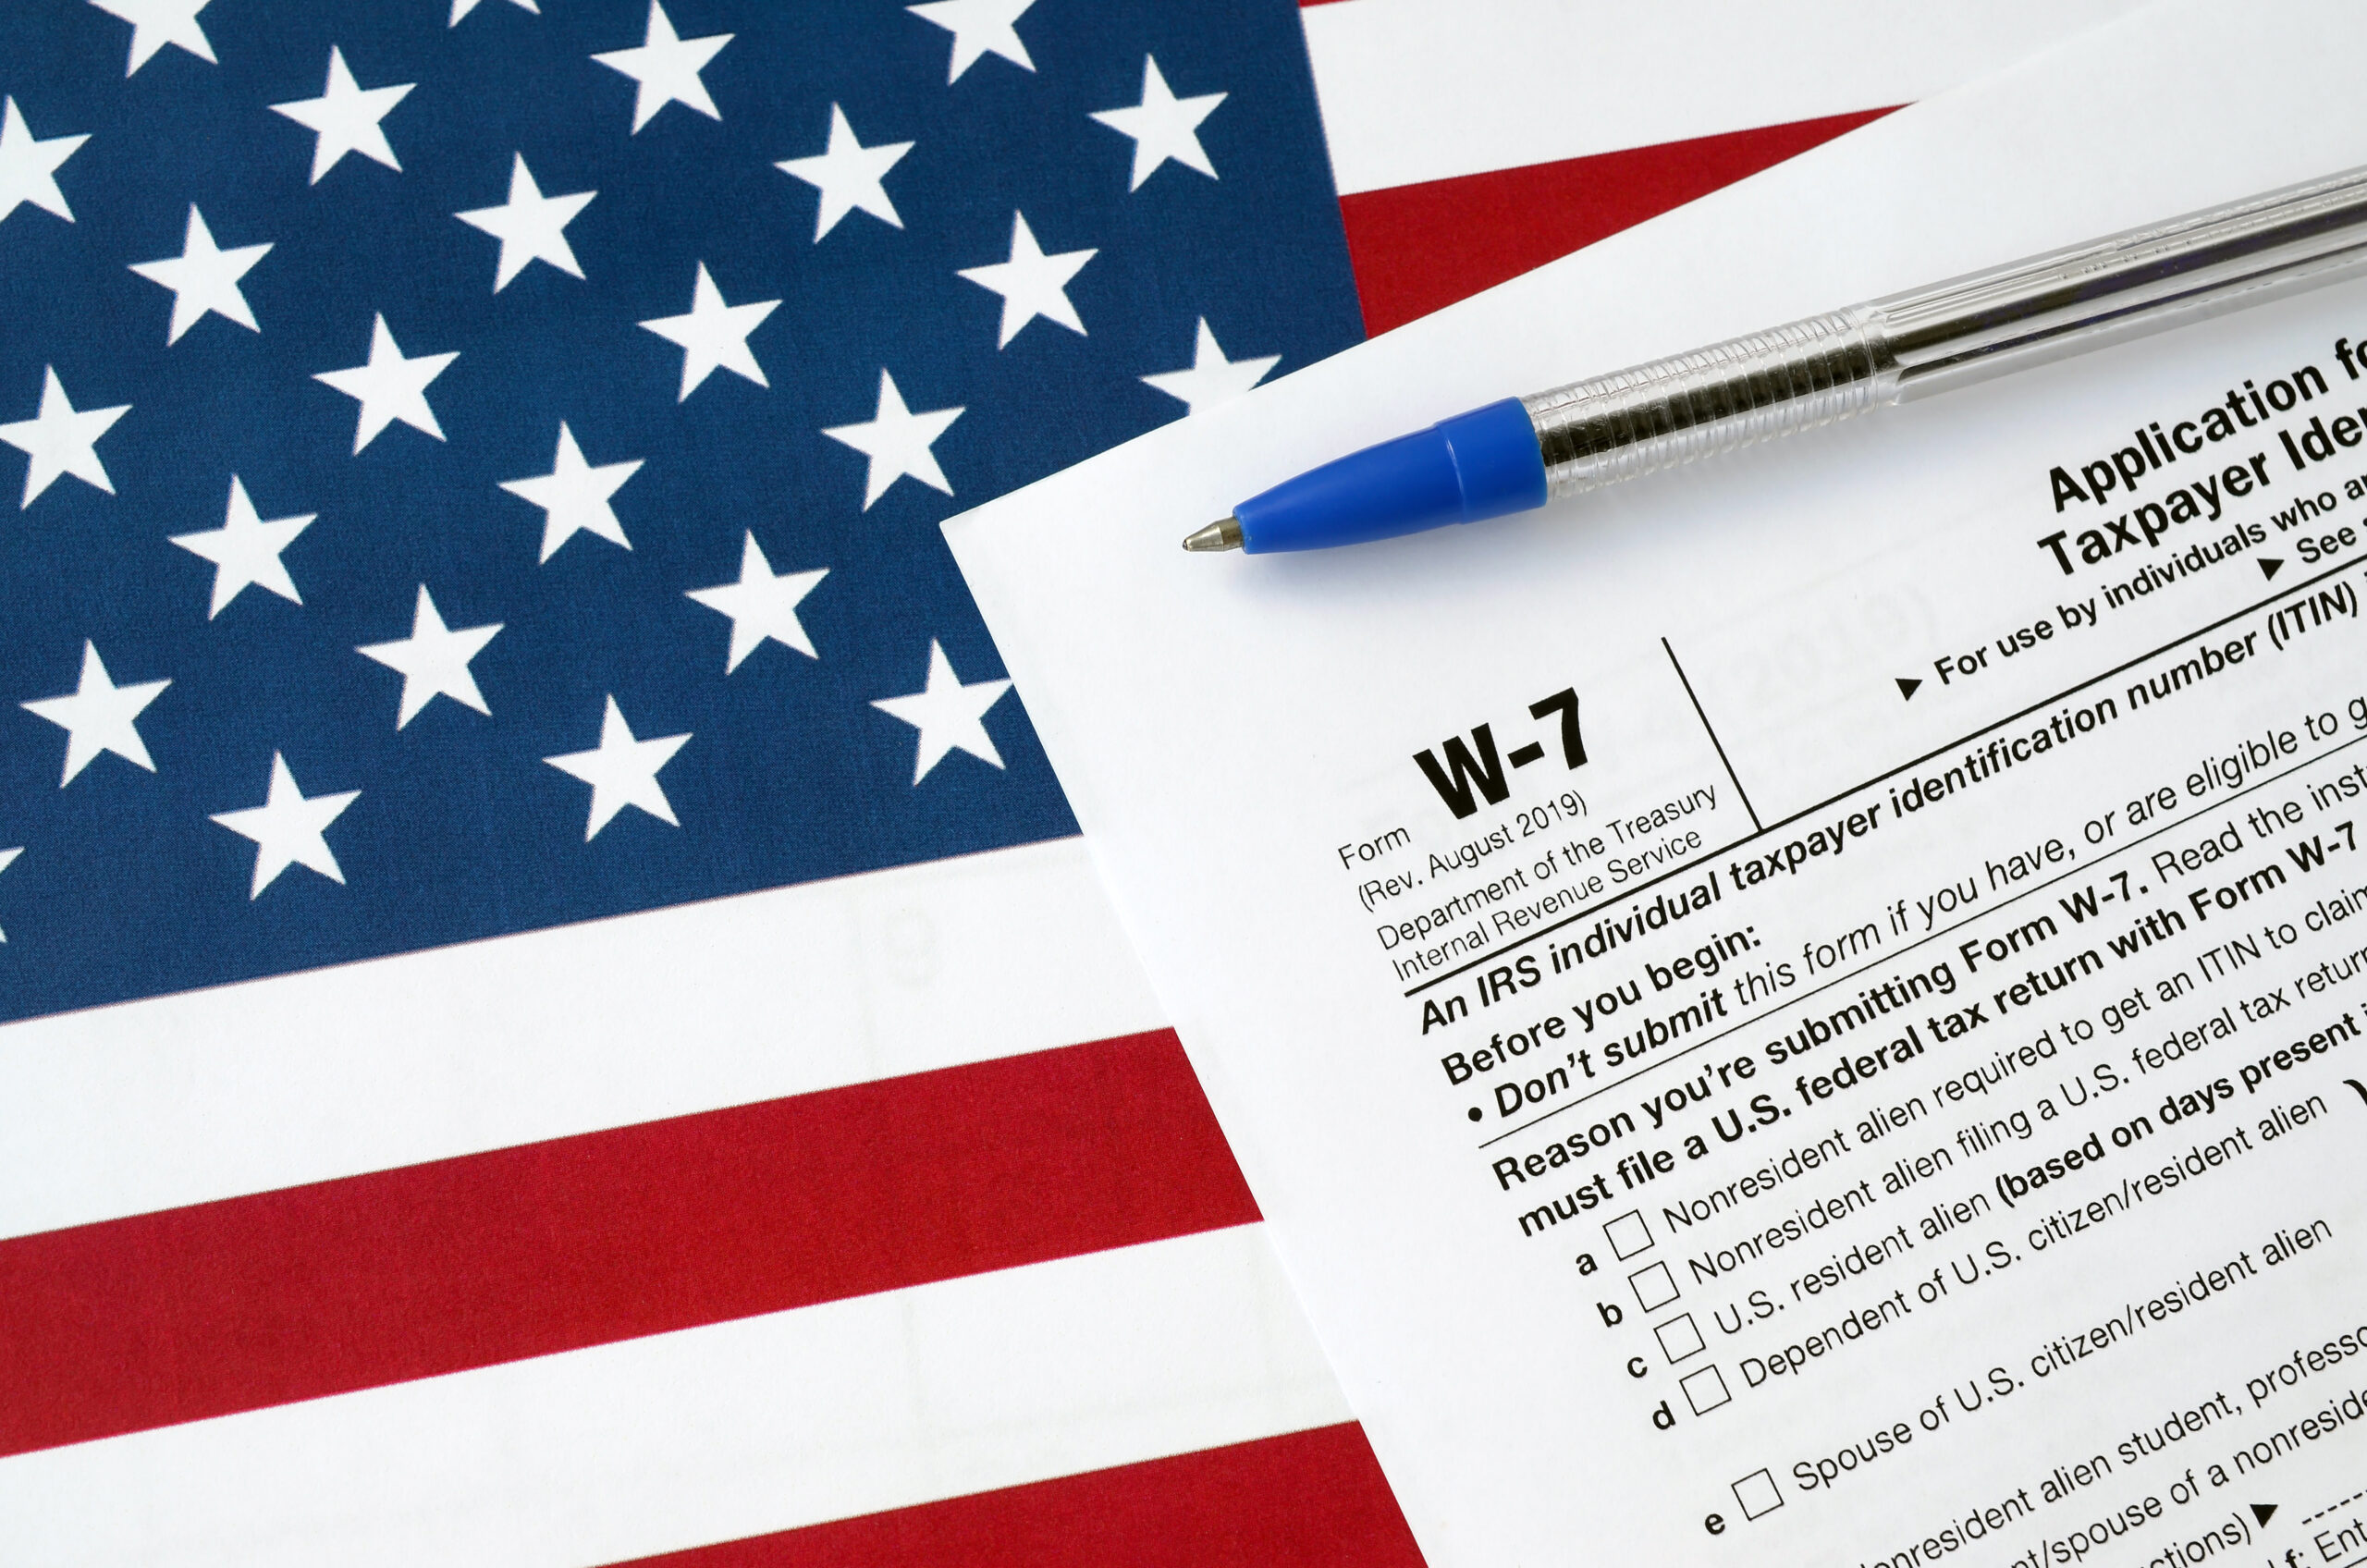 Form W-7 Application for IRS Individual taxpayer identification number and blue pen on United States flag. Internal revenue service tax form blank